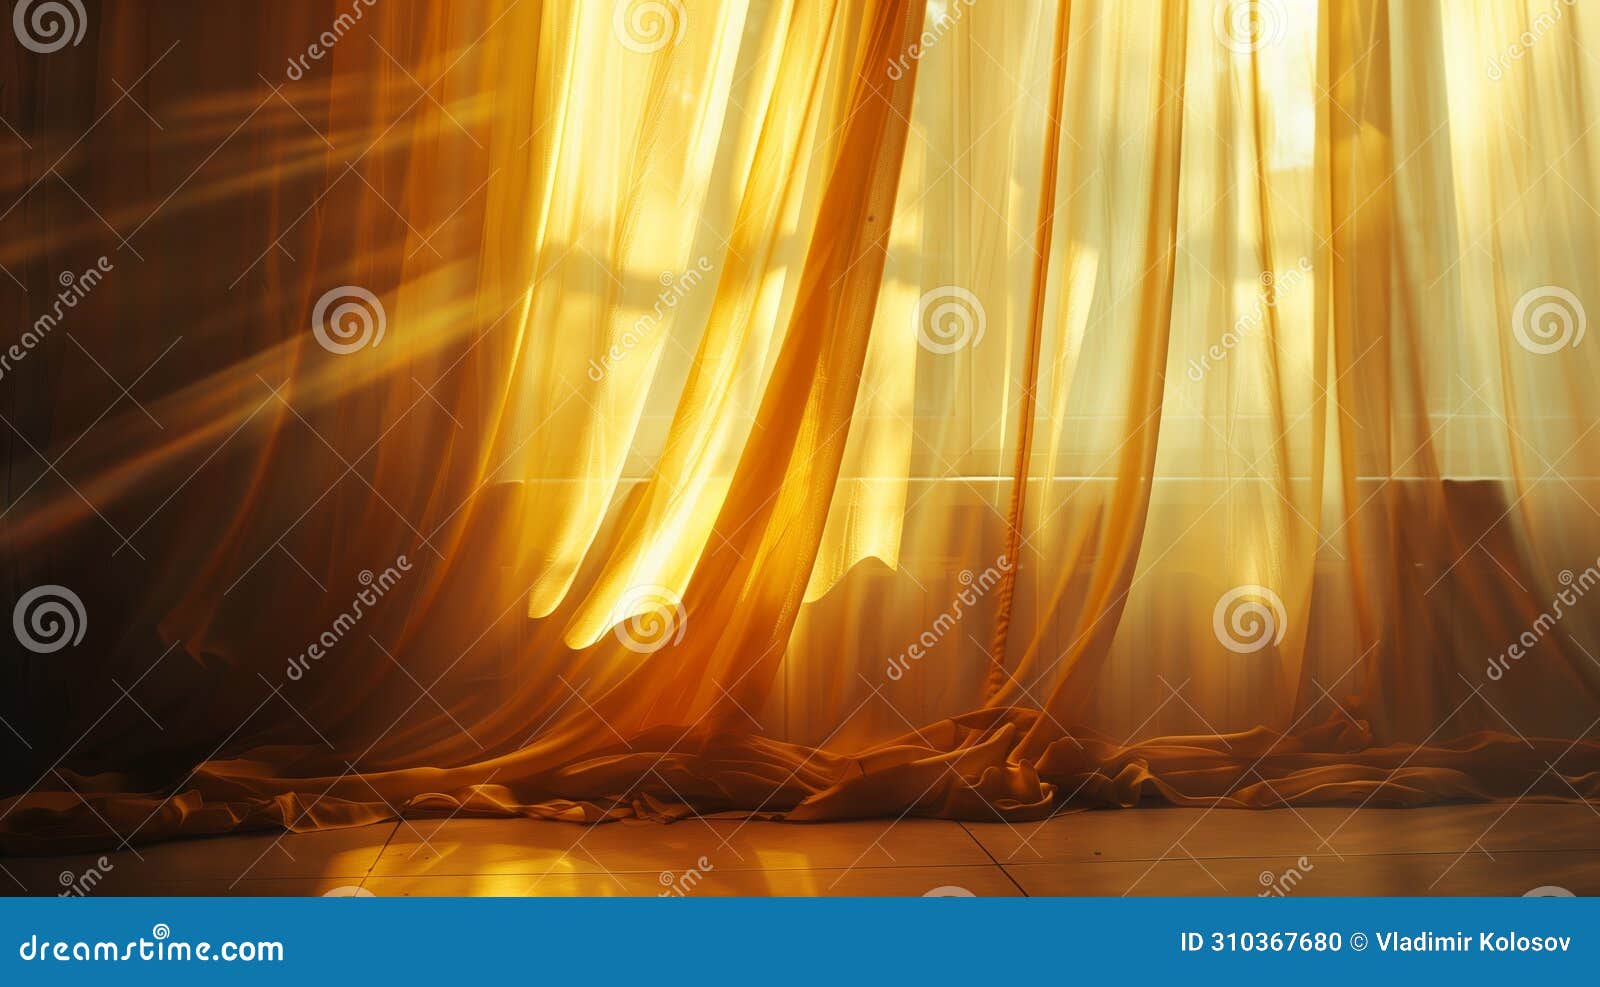 sunlight and rays are perceived through closed silk curtains.